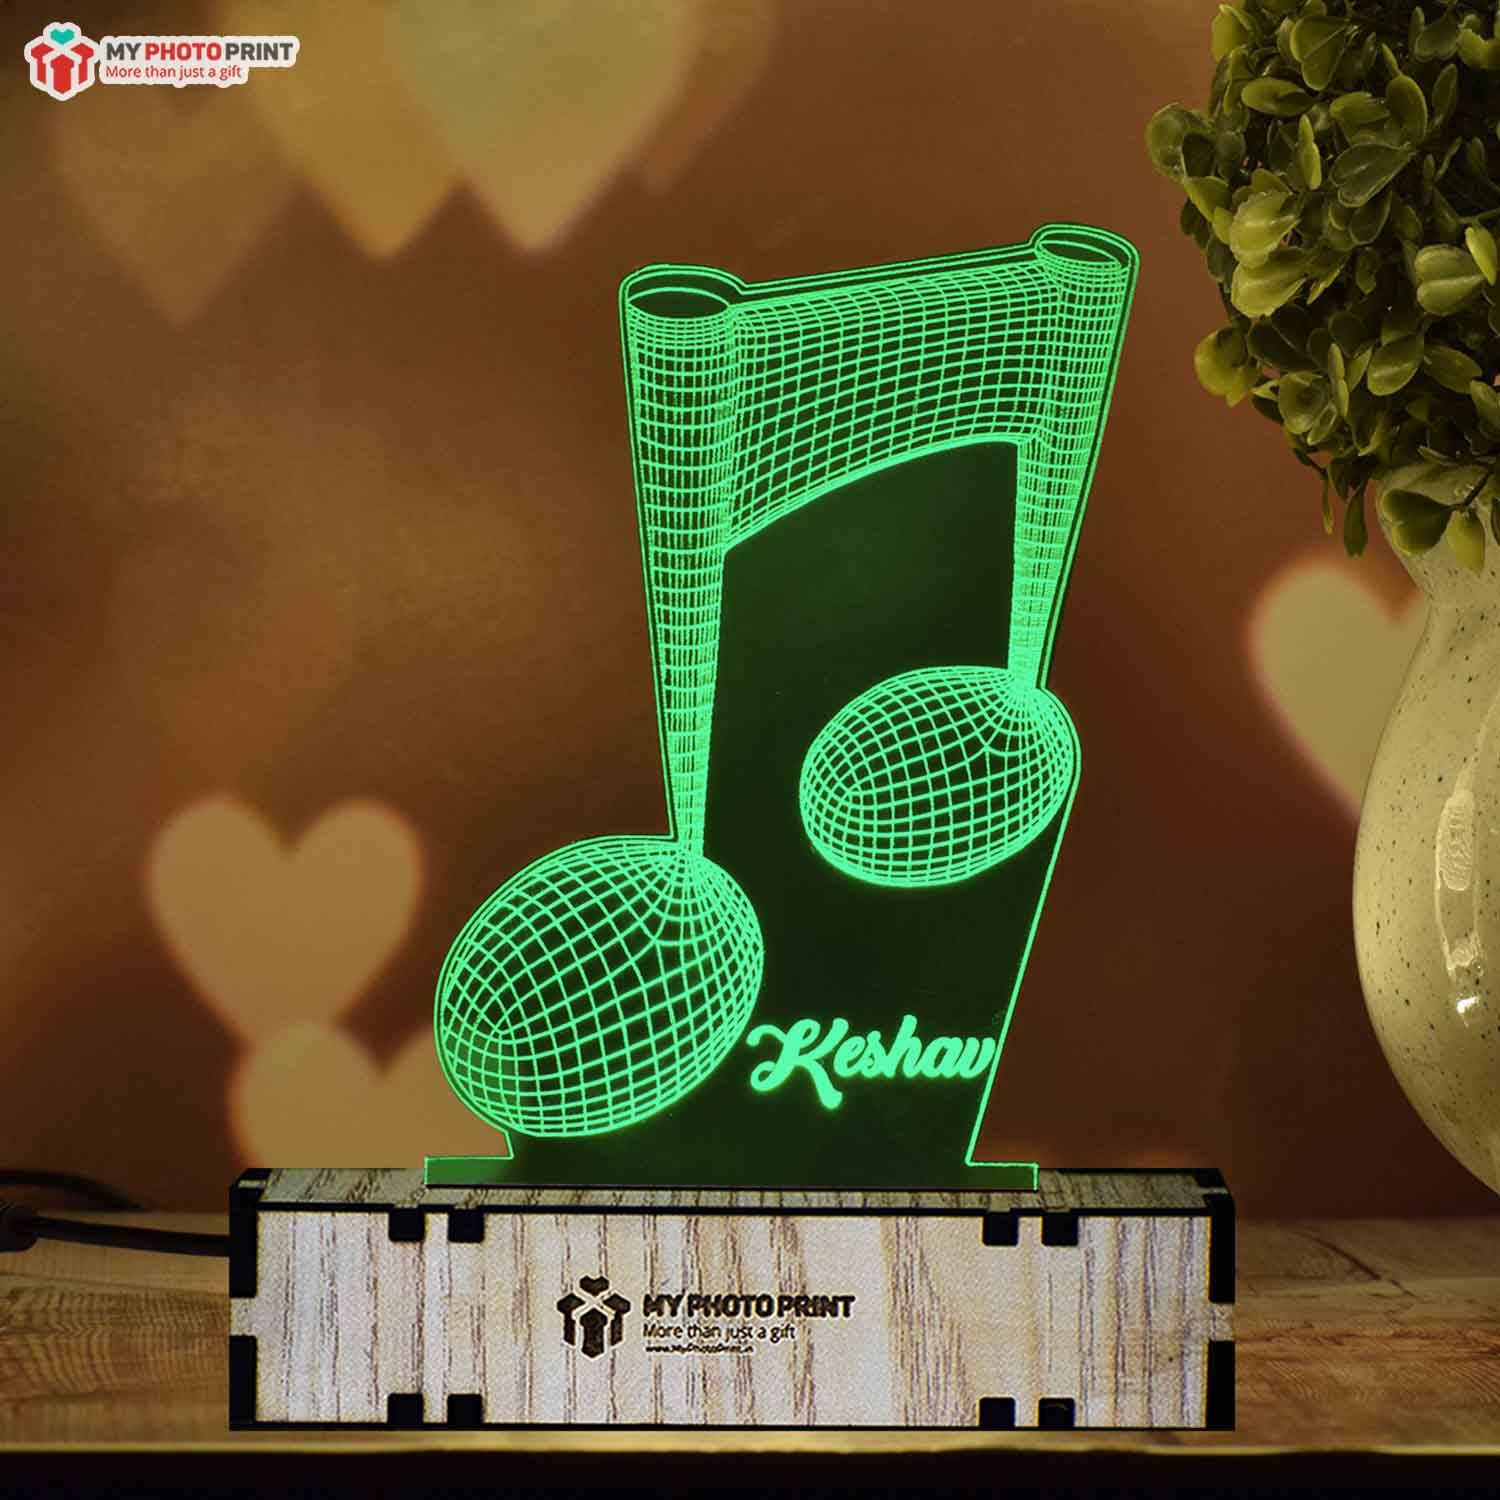 Music Note Shape Night Lamp India - Get One Today Music Note Shape is a unique gift item for men. This name night lamp for him gives the impression of the shape of the Music Note in a metal casing. There are six shapes in this product. Name, engraving design, and size details are in the base and there is a black cord with white base. Overall, it looks great.